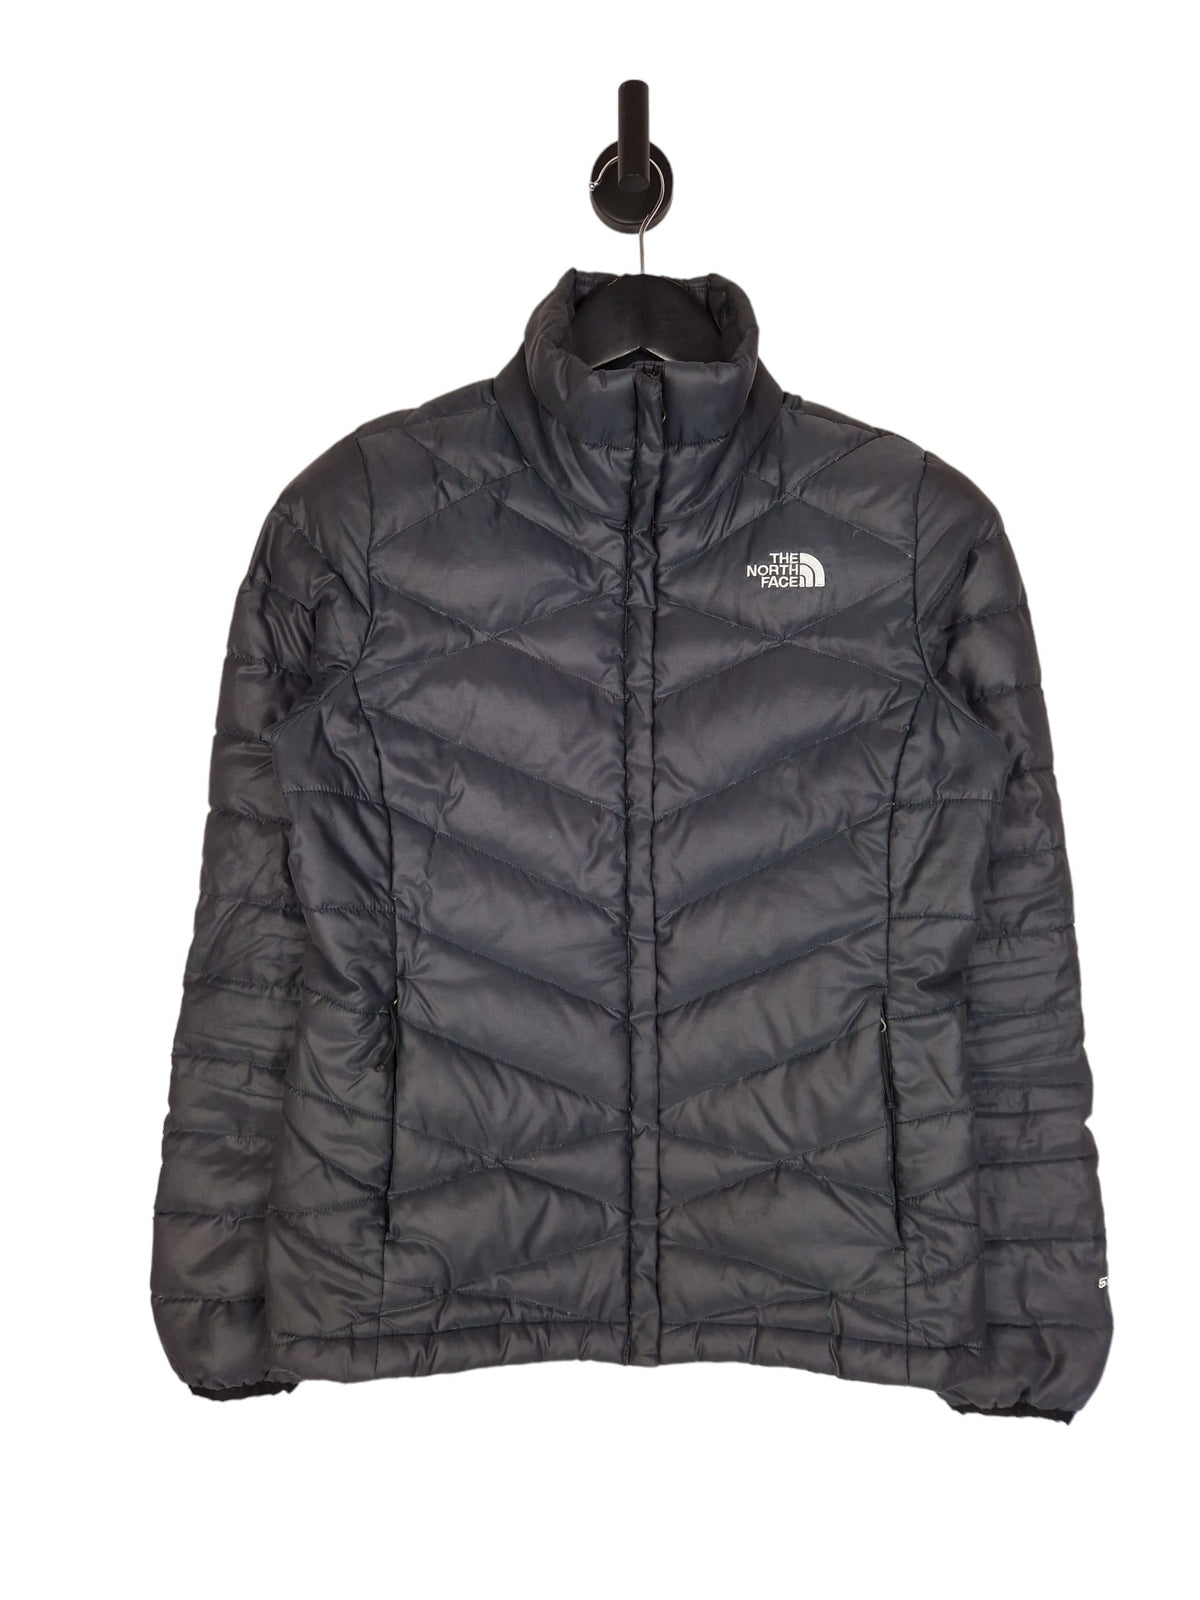 The North Face 550 Puffer Jacket - Size S/P UK 8